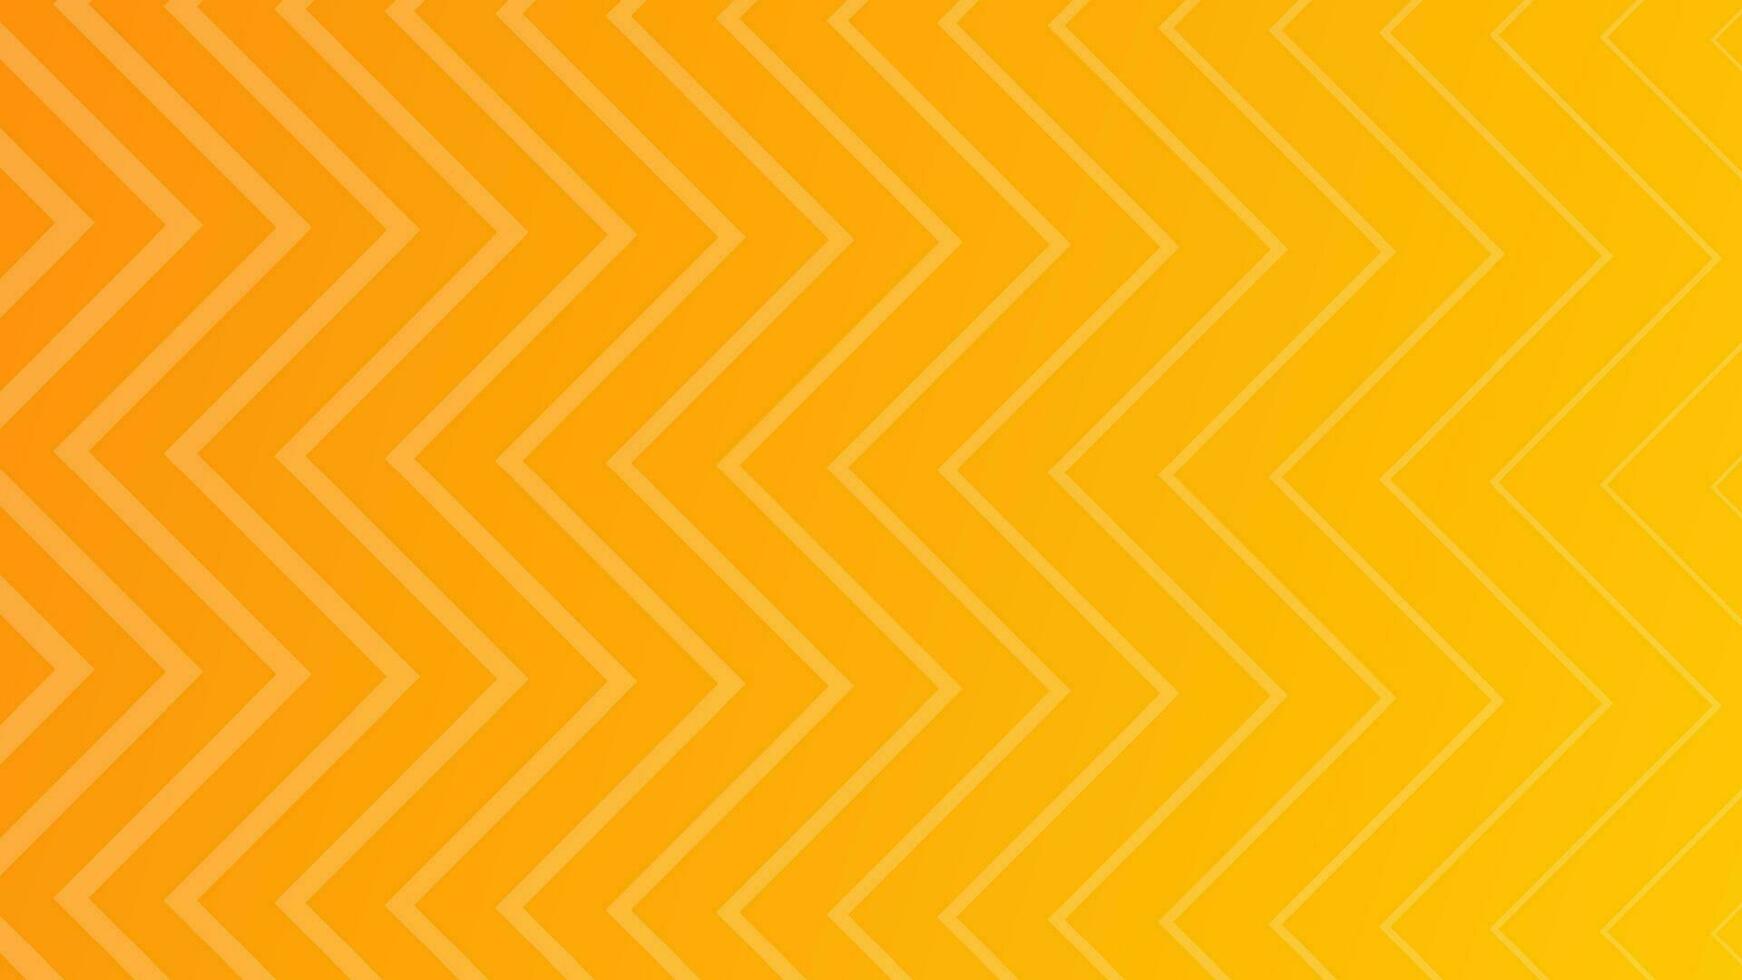 Modern colorful gradient background with zig zag lines vector